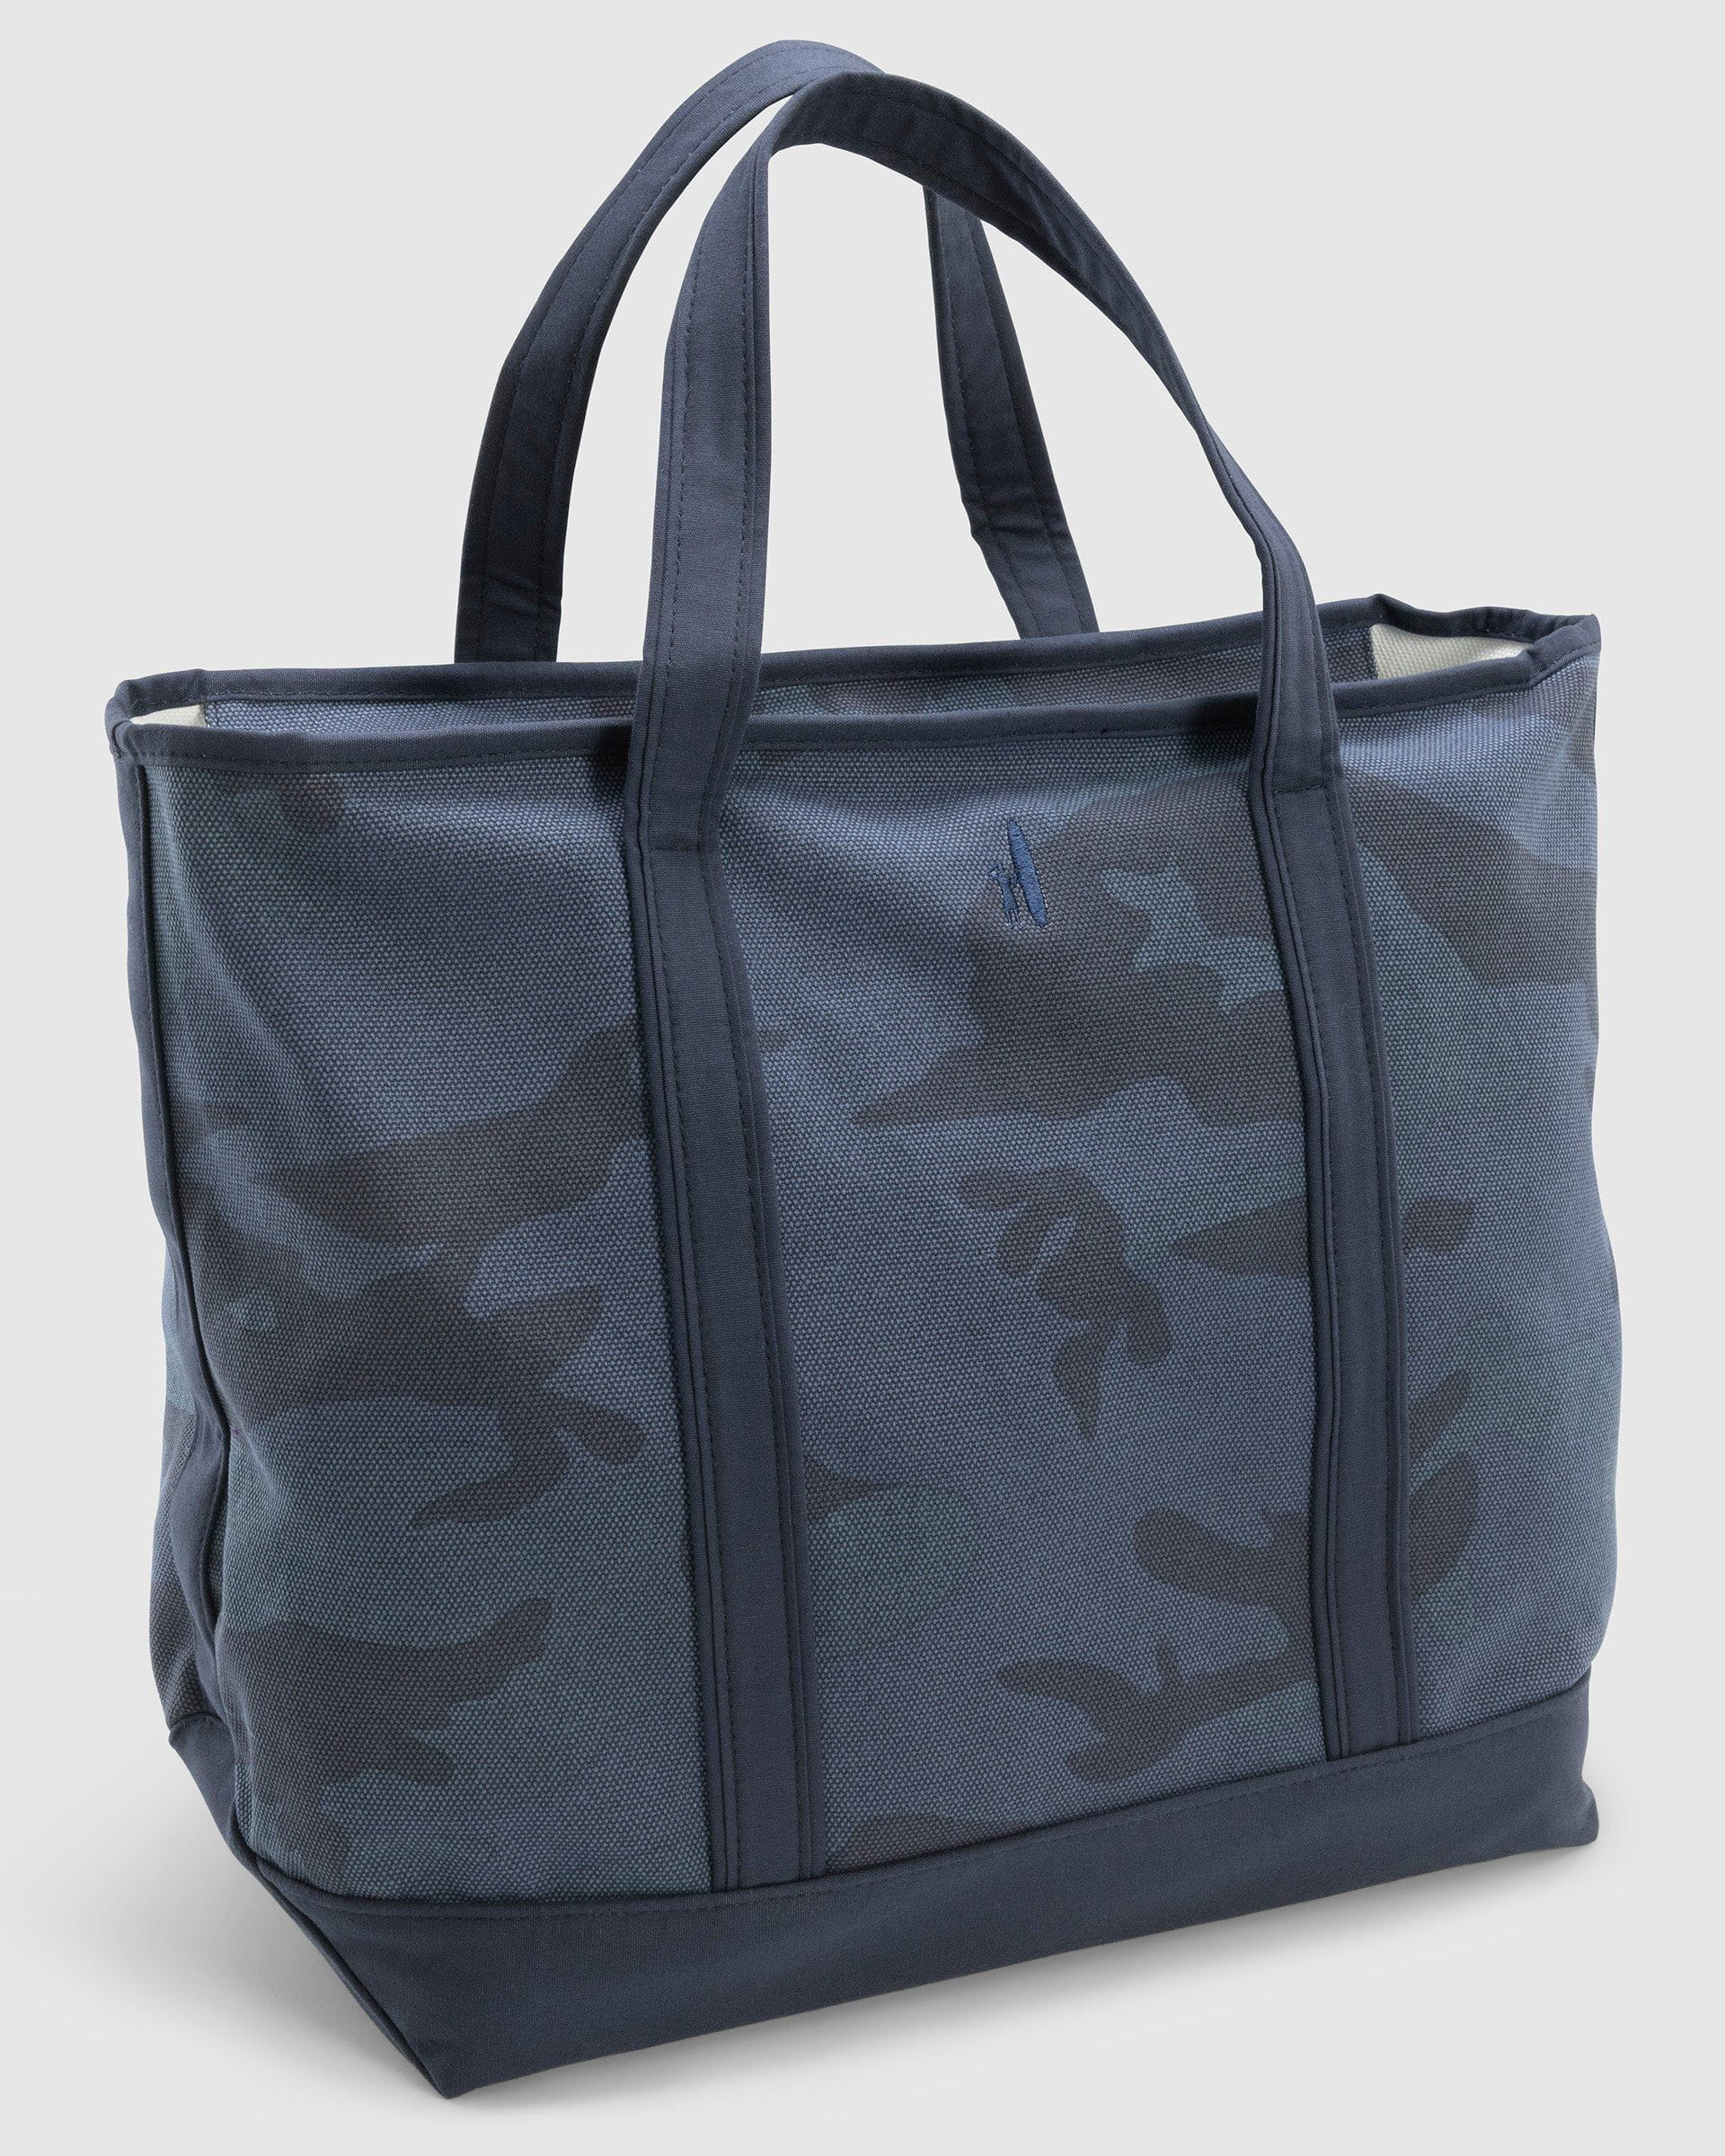 Promotional Tote Bags NW Camo Tote Bag